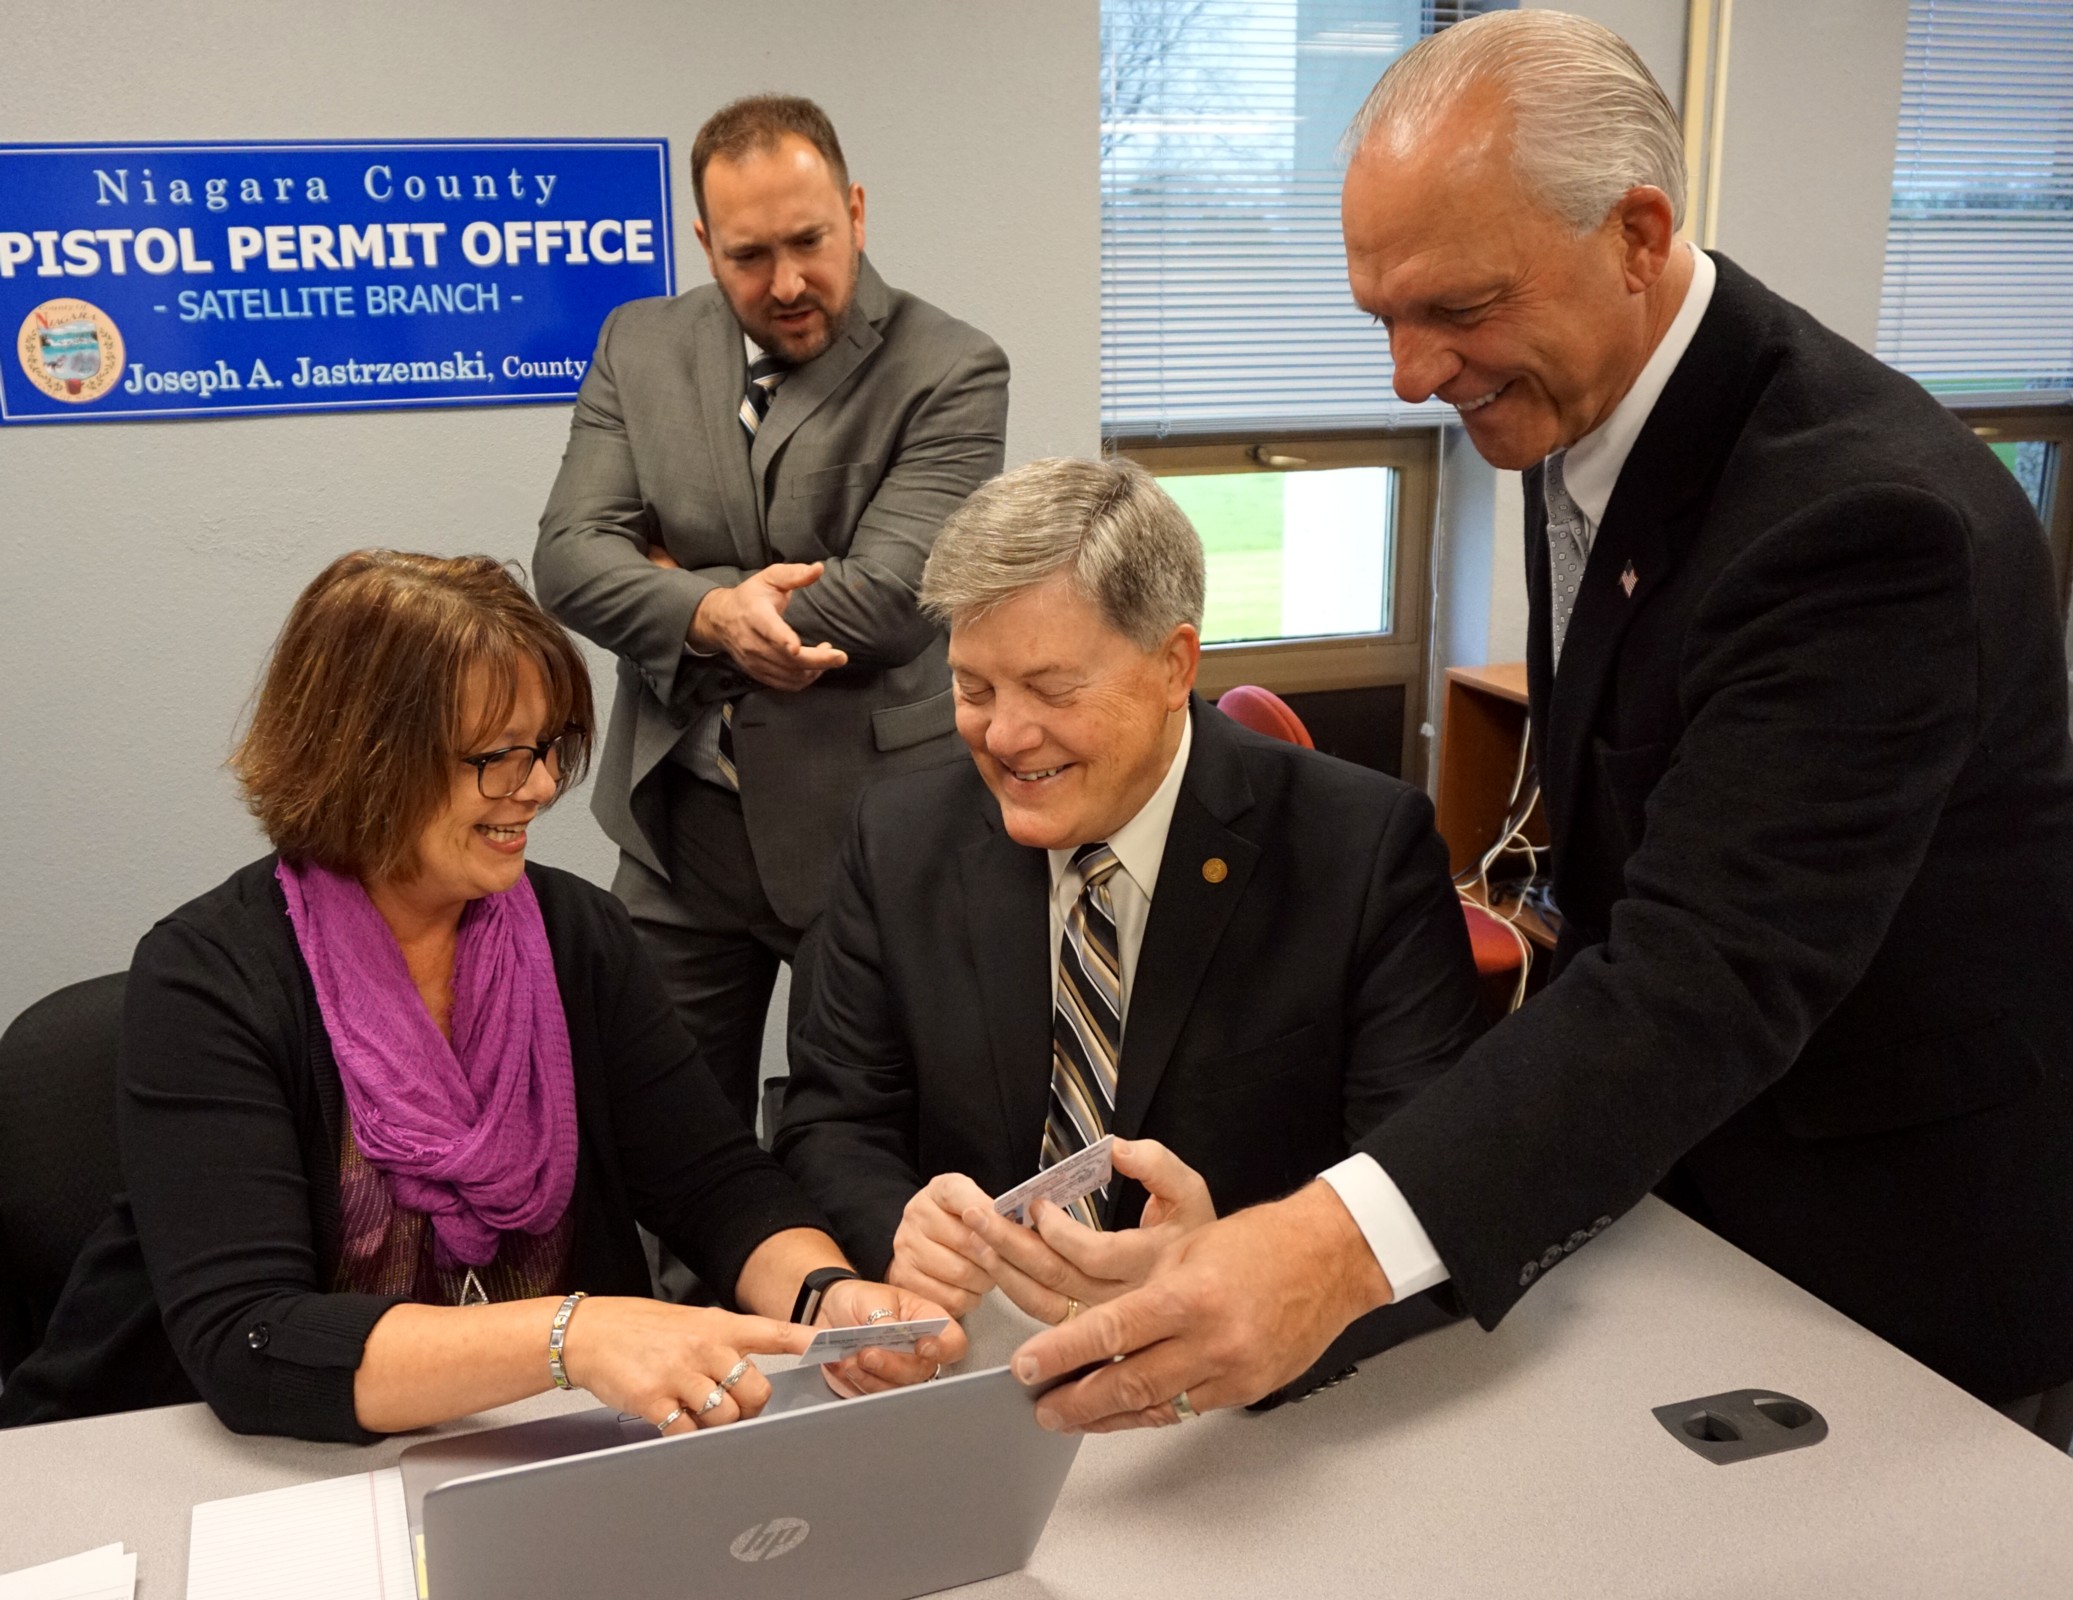 Niagara County Clerk Joe Jastrzemski, right, and County Legislator Rich Andres, R-North Tonawanda, standing, share a laugh with North Tonawanda Alderman-at-Large Jeff Glatz and Pistol Permit Clerk Patti Jo Sturak Friday during a test run of a remote "satellite" Pistol Permit Office that will be held in North Tonawanda on the second Wednesday of each month. A similar office is set for Niagara Falls, and will be held the fourth Wednesday of each month.